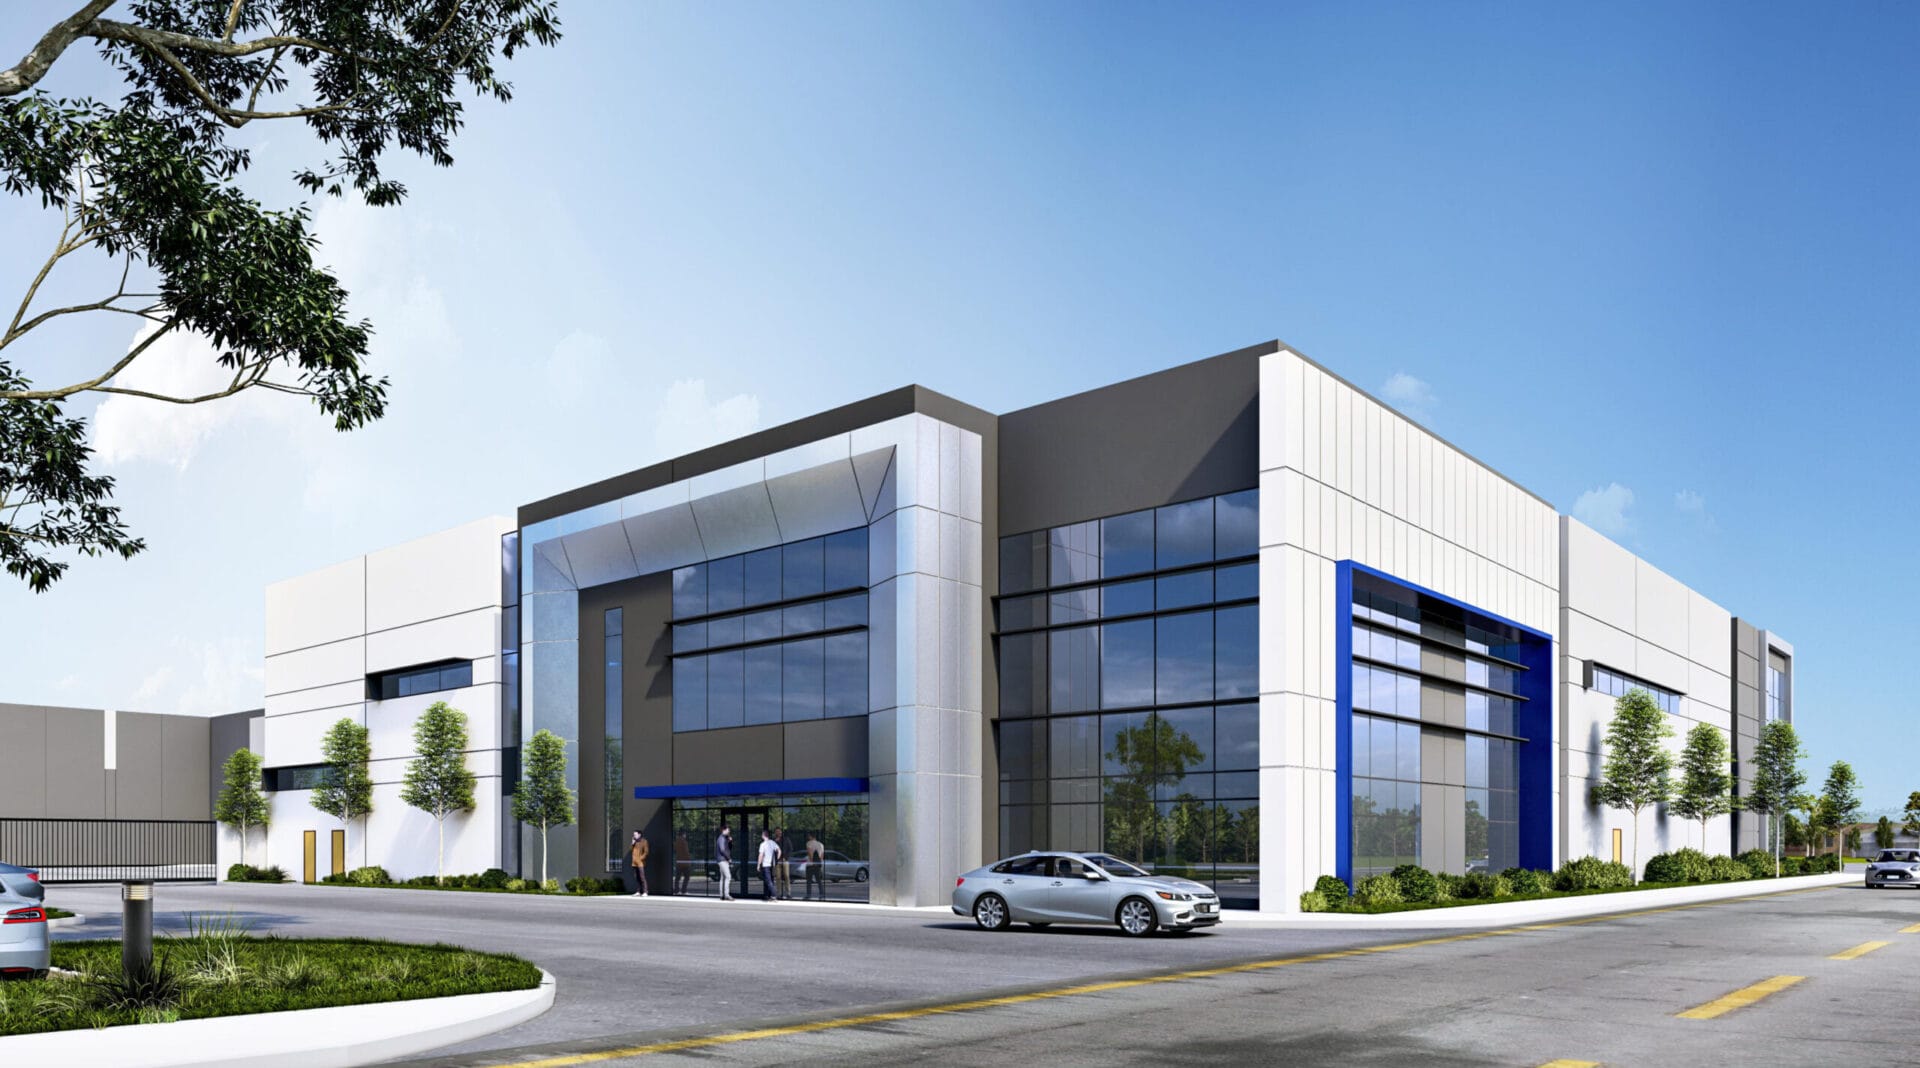 Bridge Industrial Announces Entrance into San Fernando Valley Submarket with Acquisition of ‘Bridge Point North Hollywood’